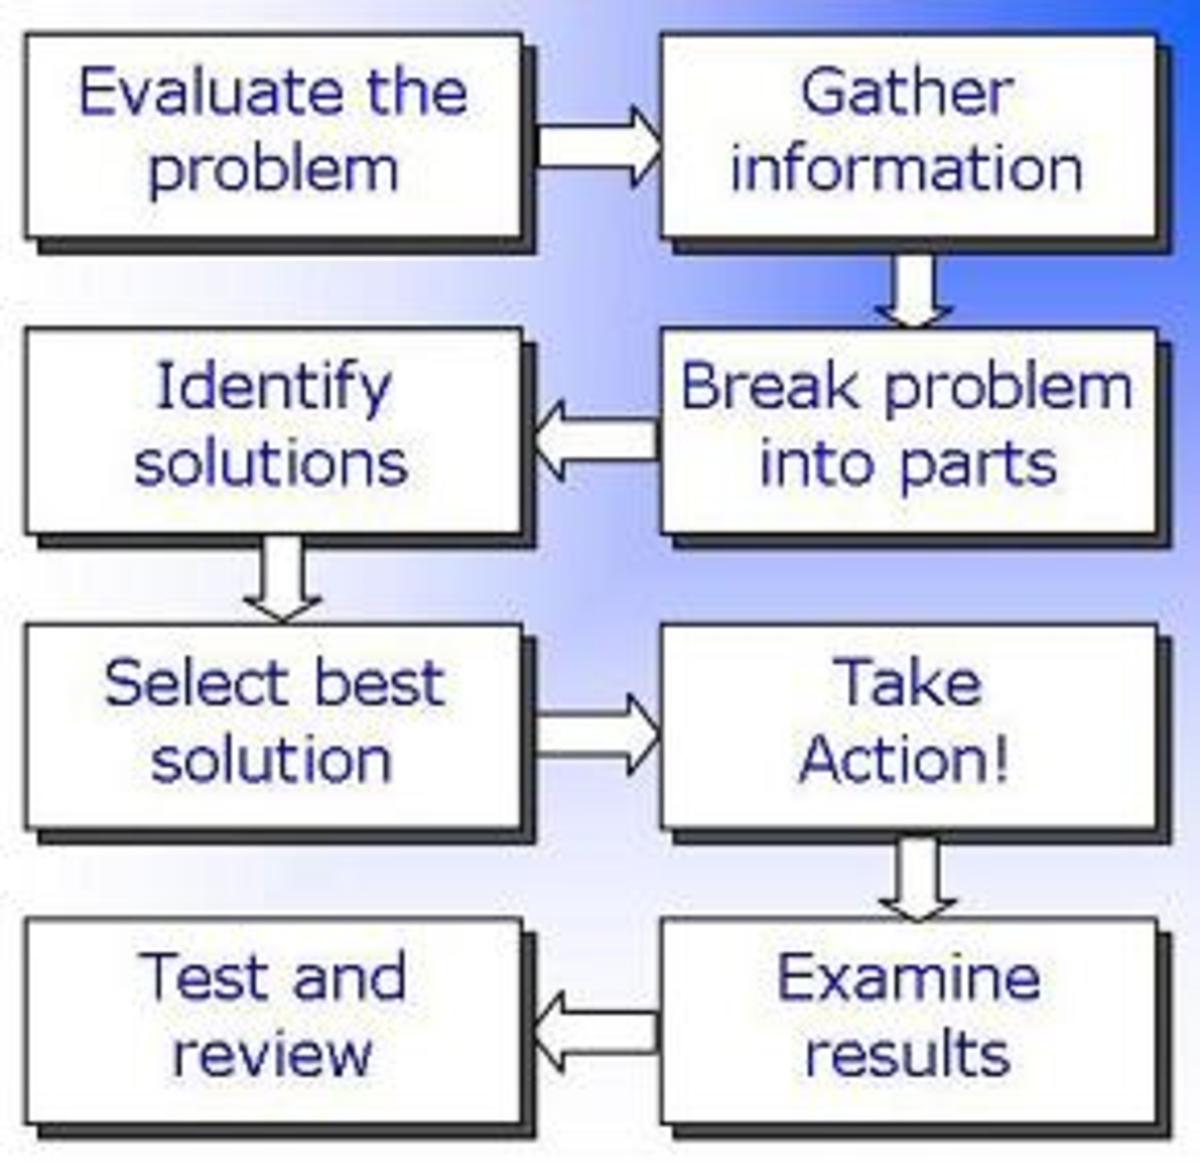 Lean initiative cycle in the correct logical order